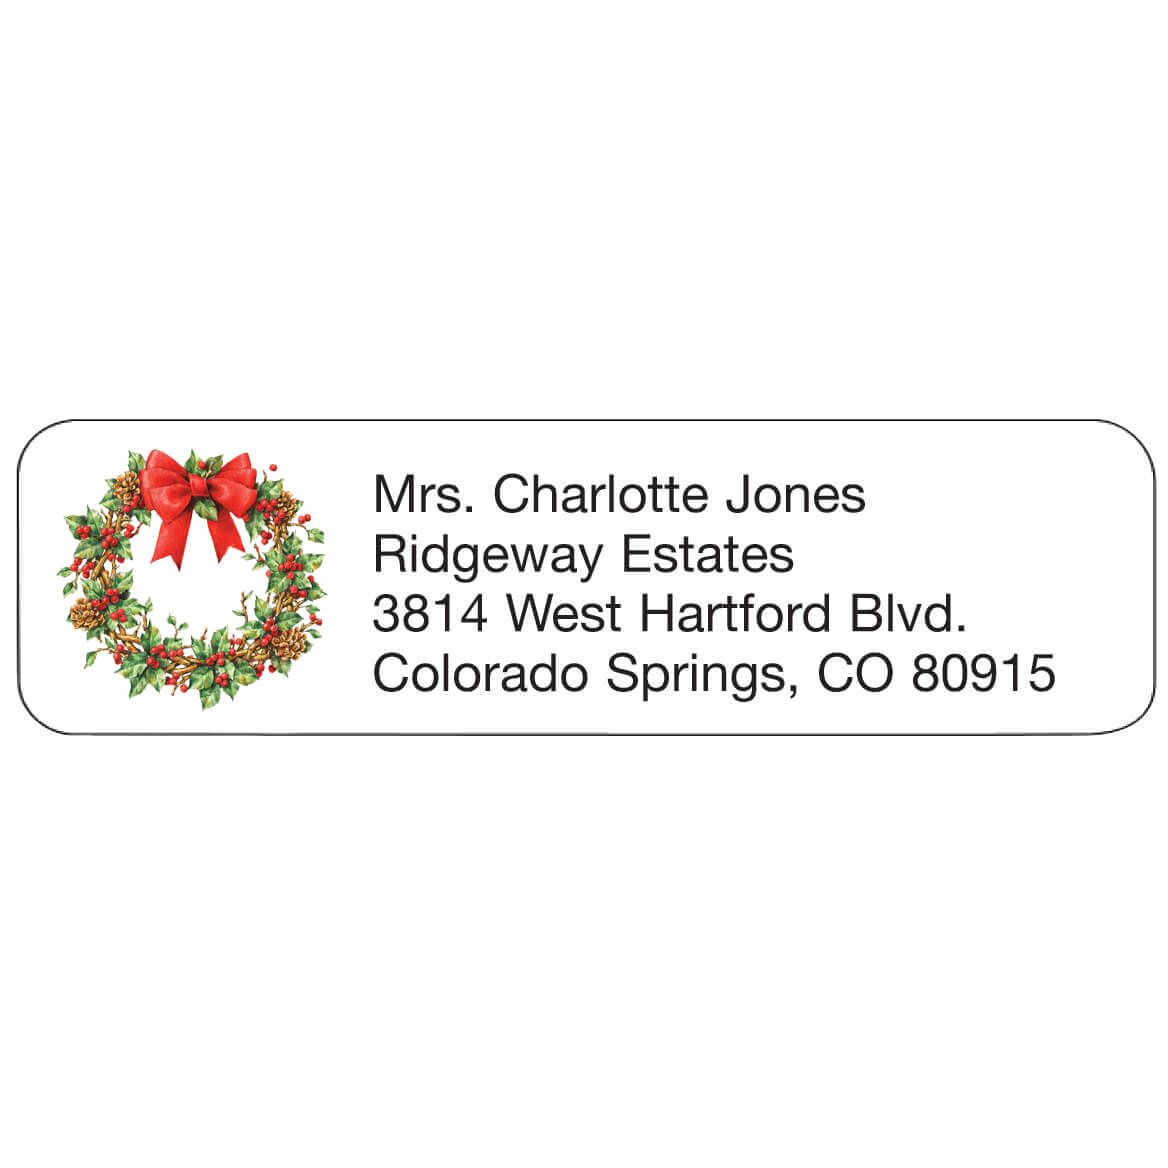 Personal Design Labels Holiday Wreath Set of 200 + '-' + 357759